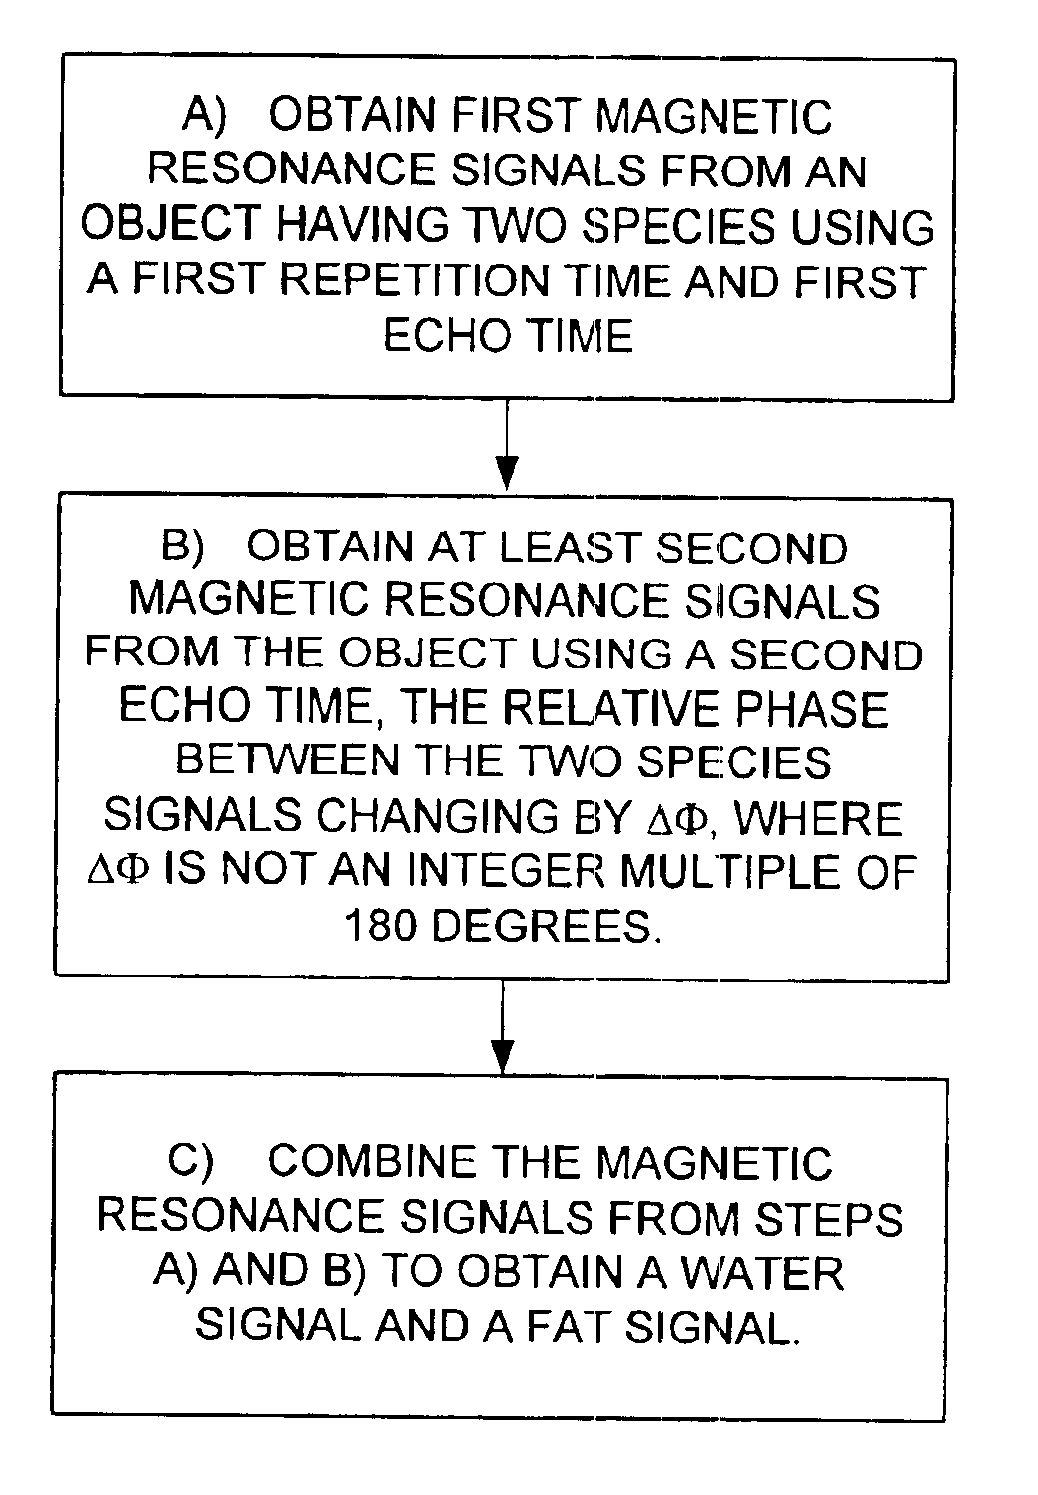 Magnetic resonance imaging with fat-water signal separation